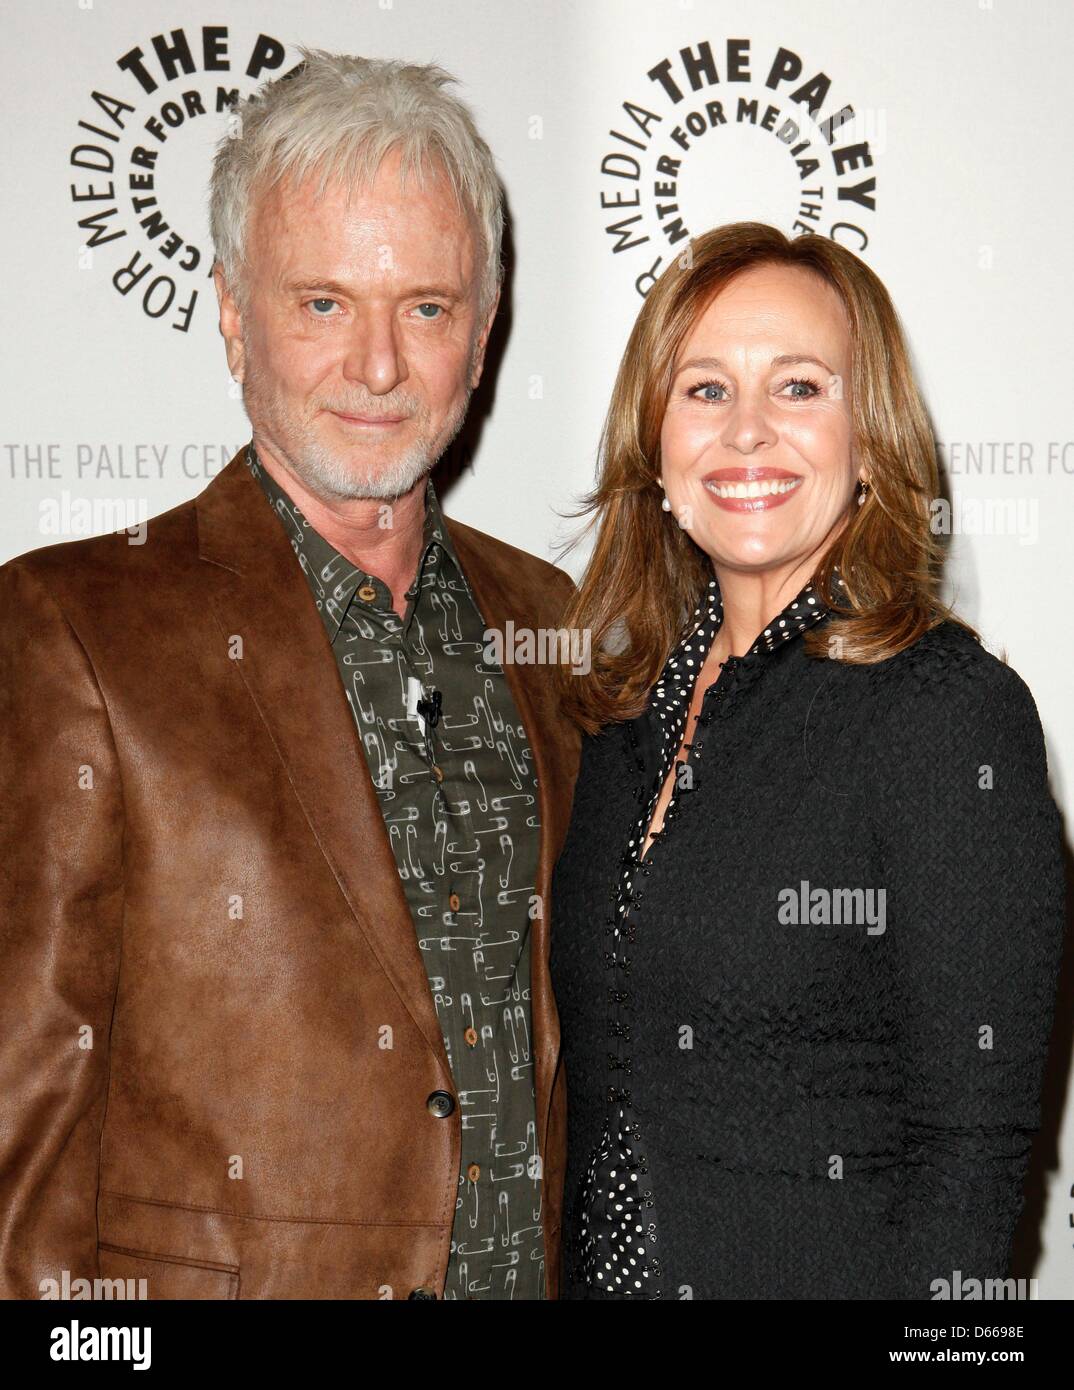 Los Angeles, CA, USA. April 12, 2013. Anthony Geary, Genie Francis at arrivals for General Hospital: Celebrating 50 Years and Looking Forward, Paley Center for Media, Los Angeles.  Photo By: Emiley Schweich/Everett Collection/Alamy Live News Stock Photo